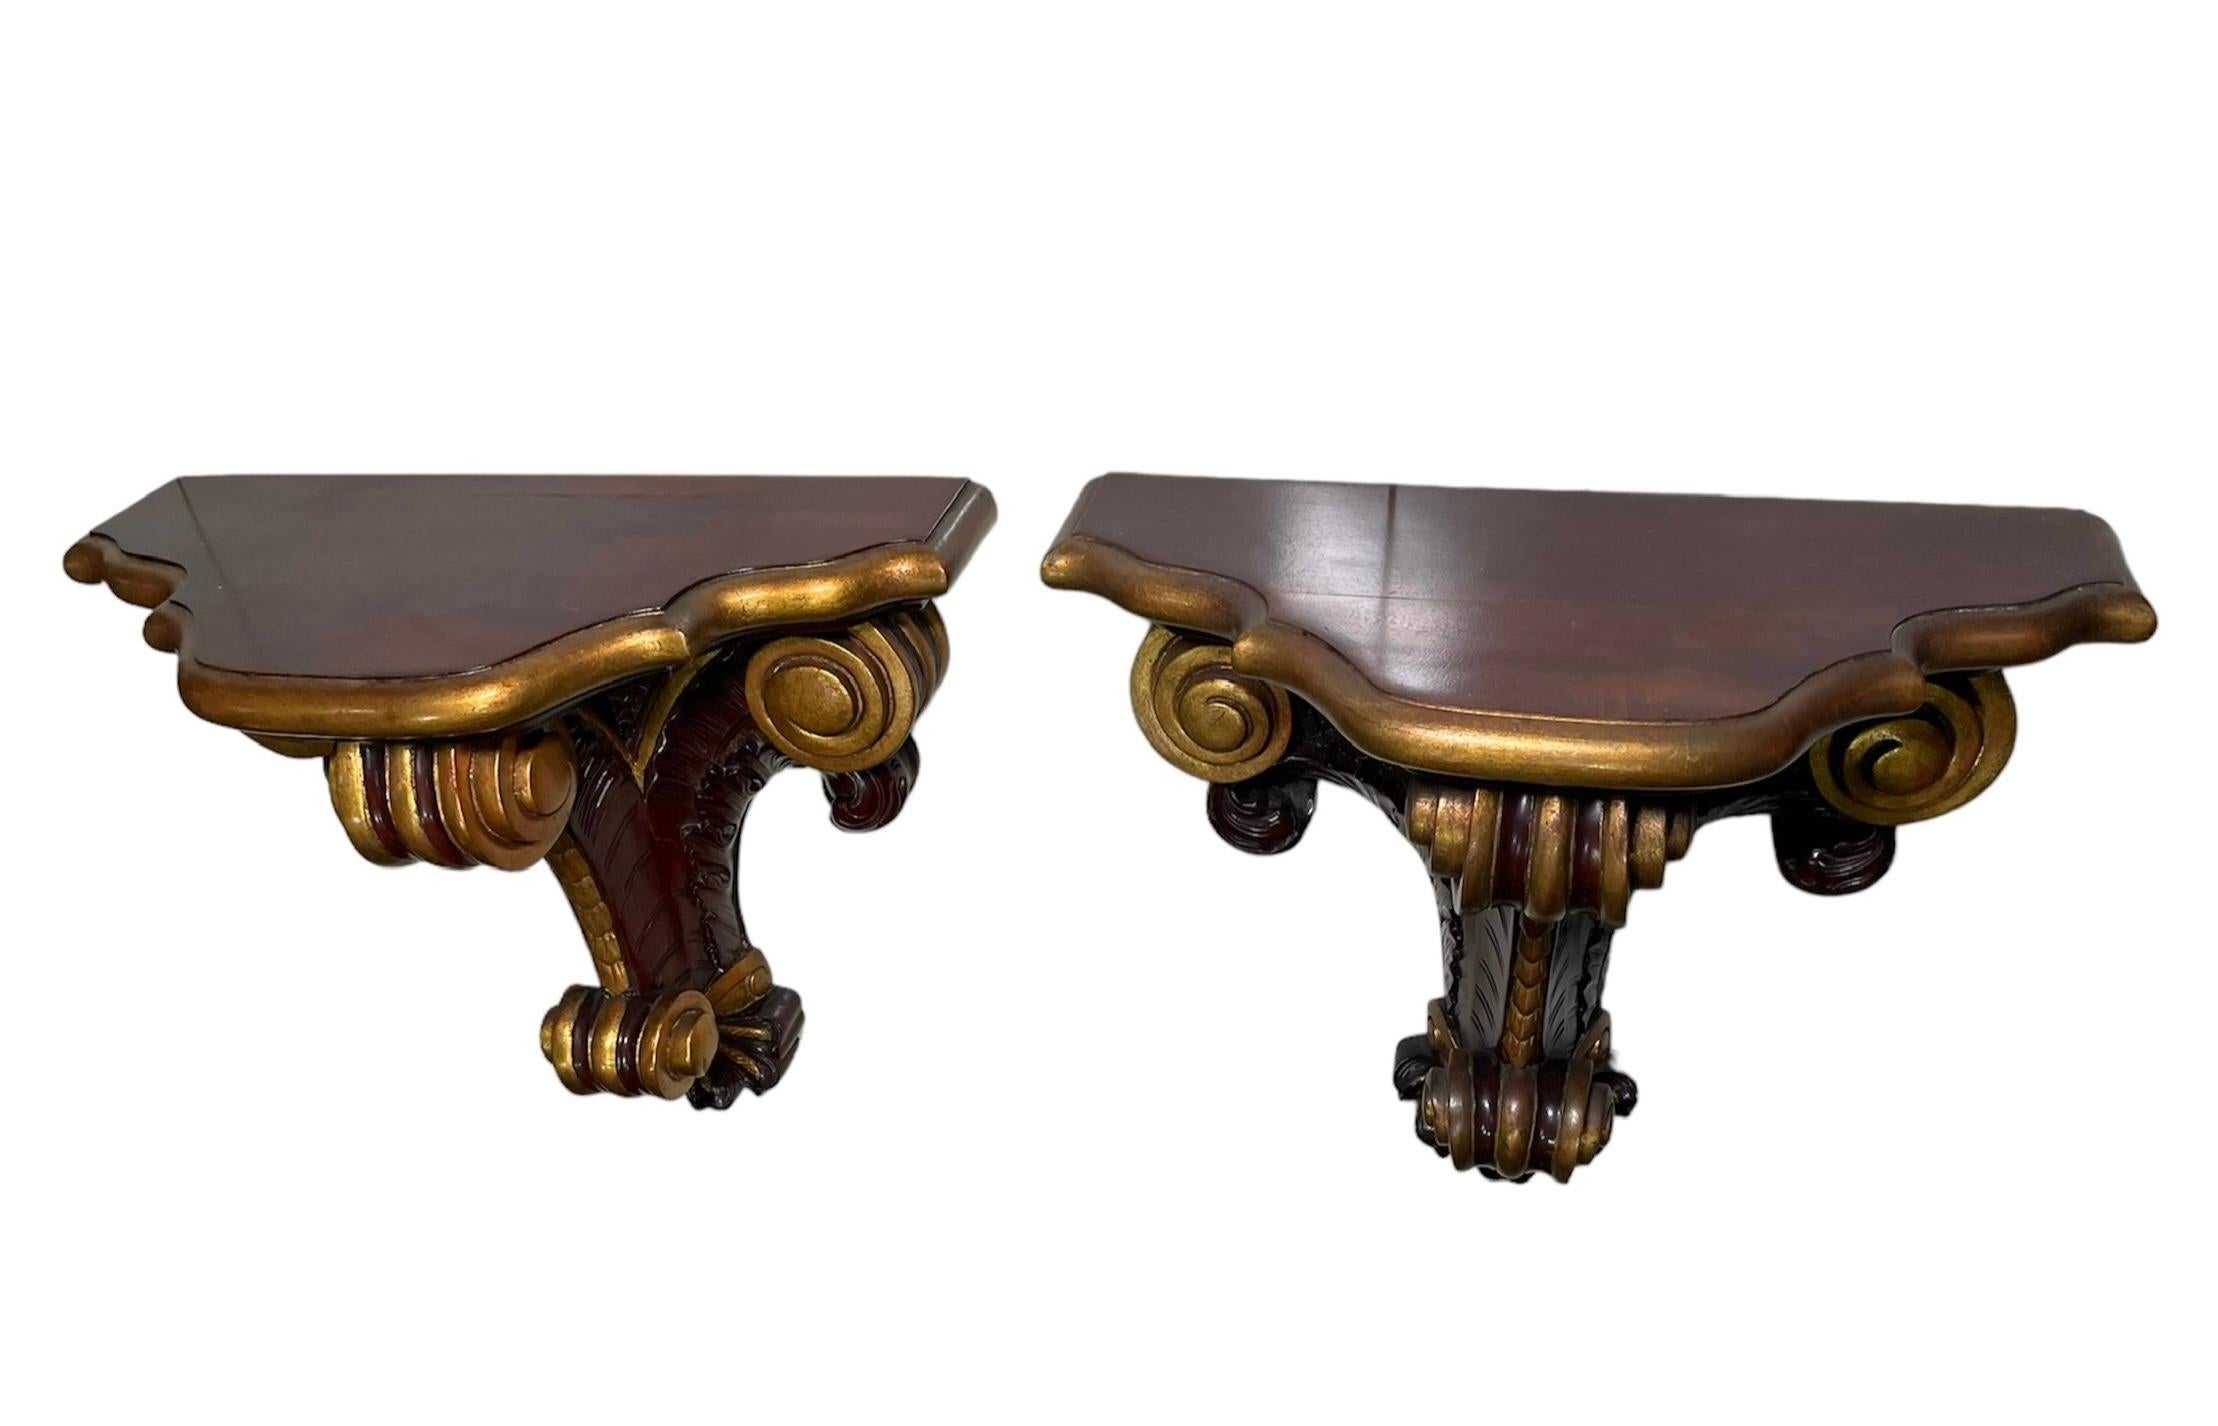 This is a Rococo Style Pair of heavy Wood Bracket/Shelves. It depicts a pair of gilt dark brown wood brackets/shelves with kind of demilune top with serpentine borders. The tops are supported by three wide scrolls. The scrolls of the sides are